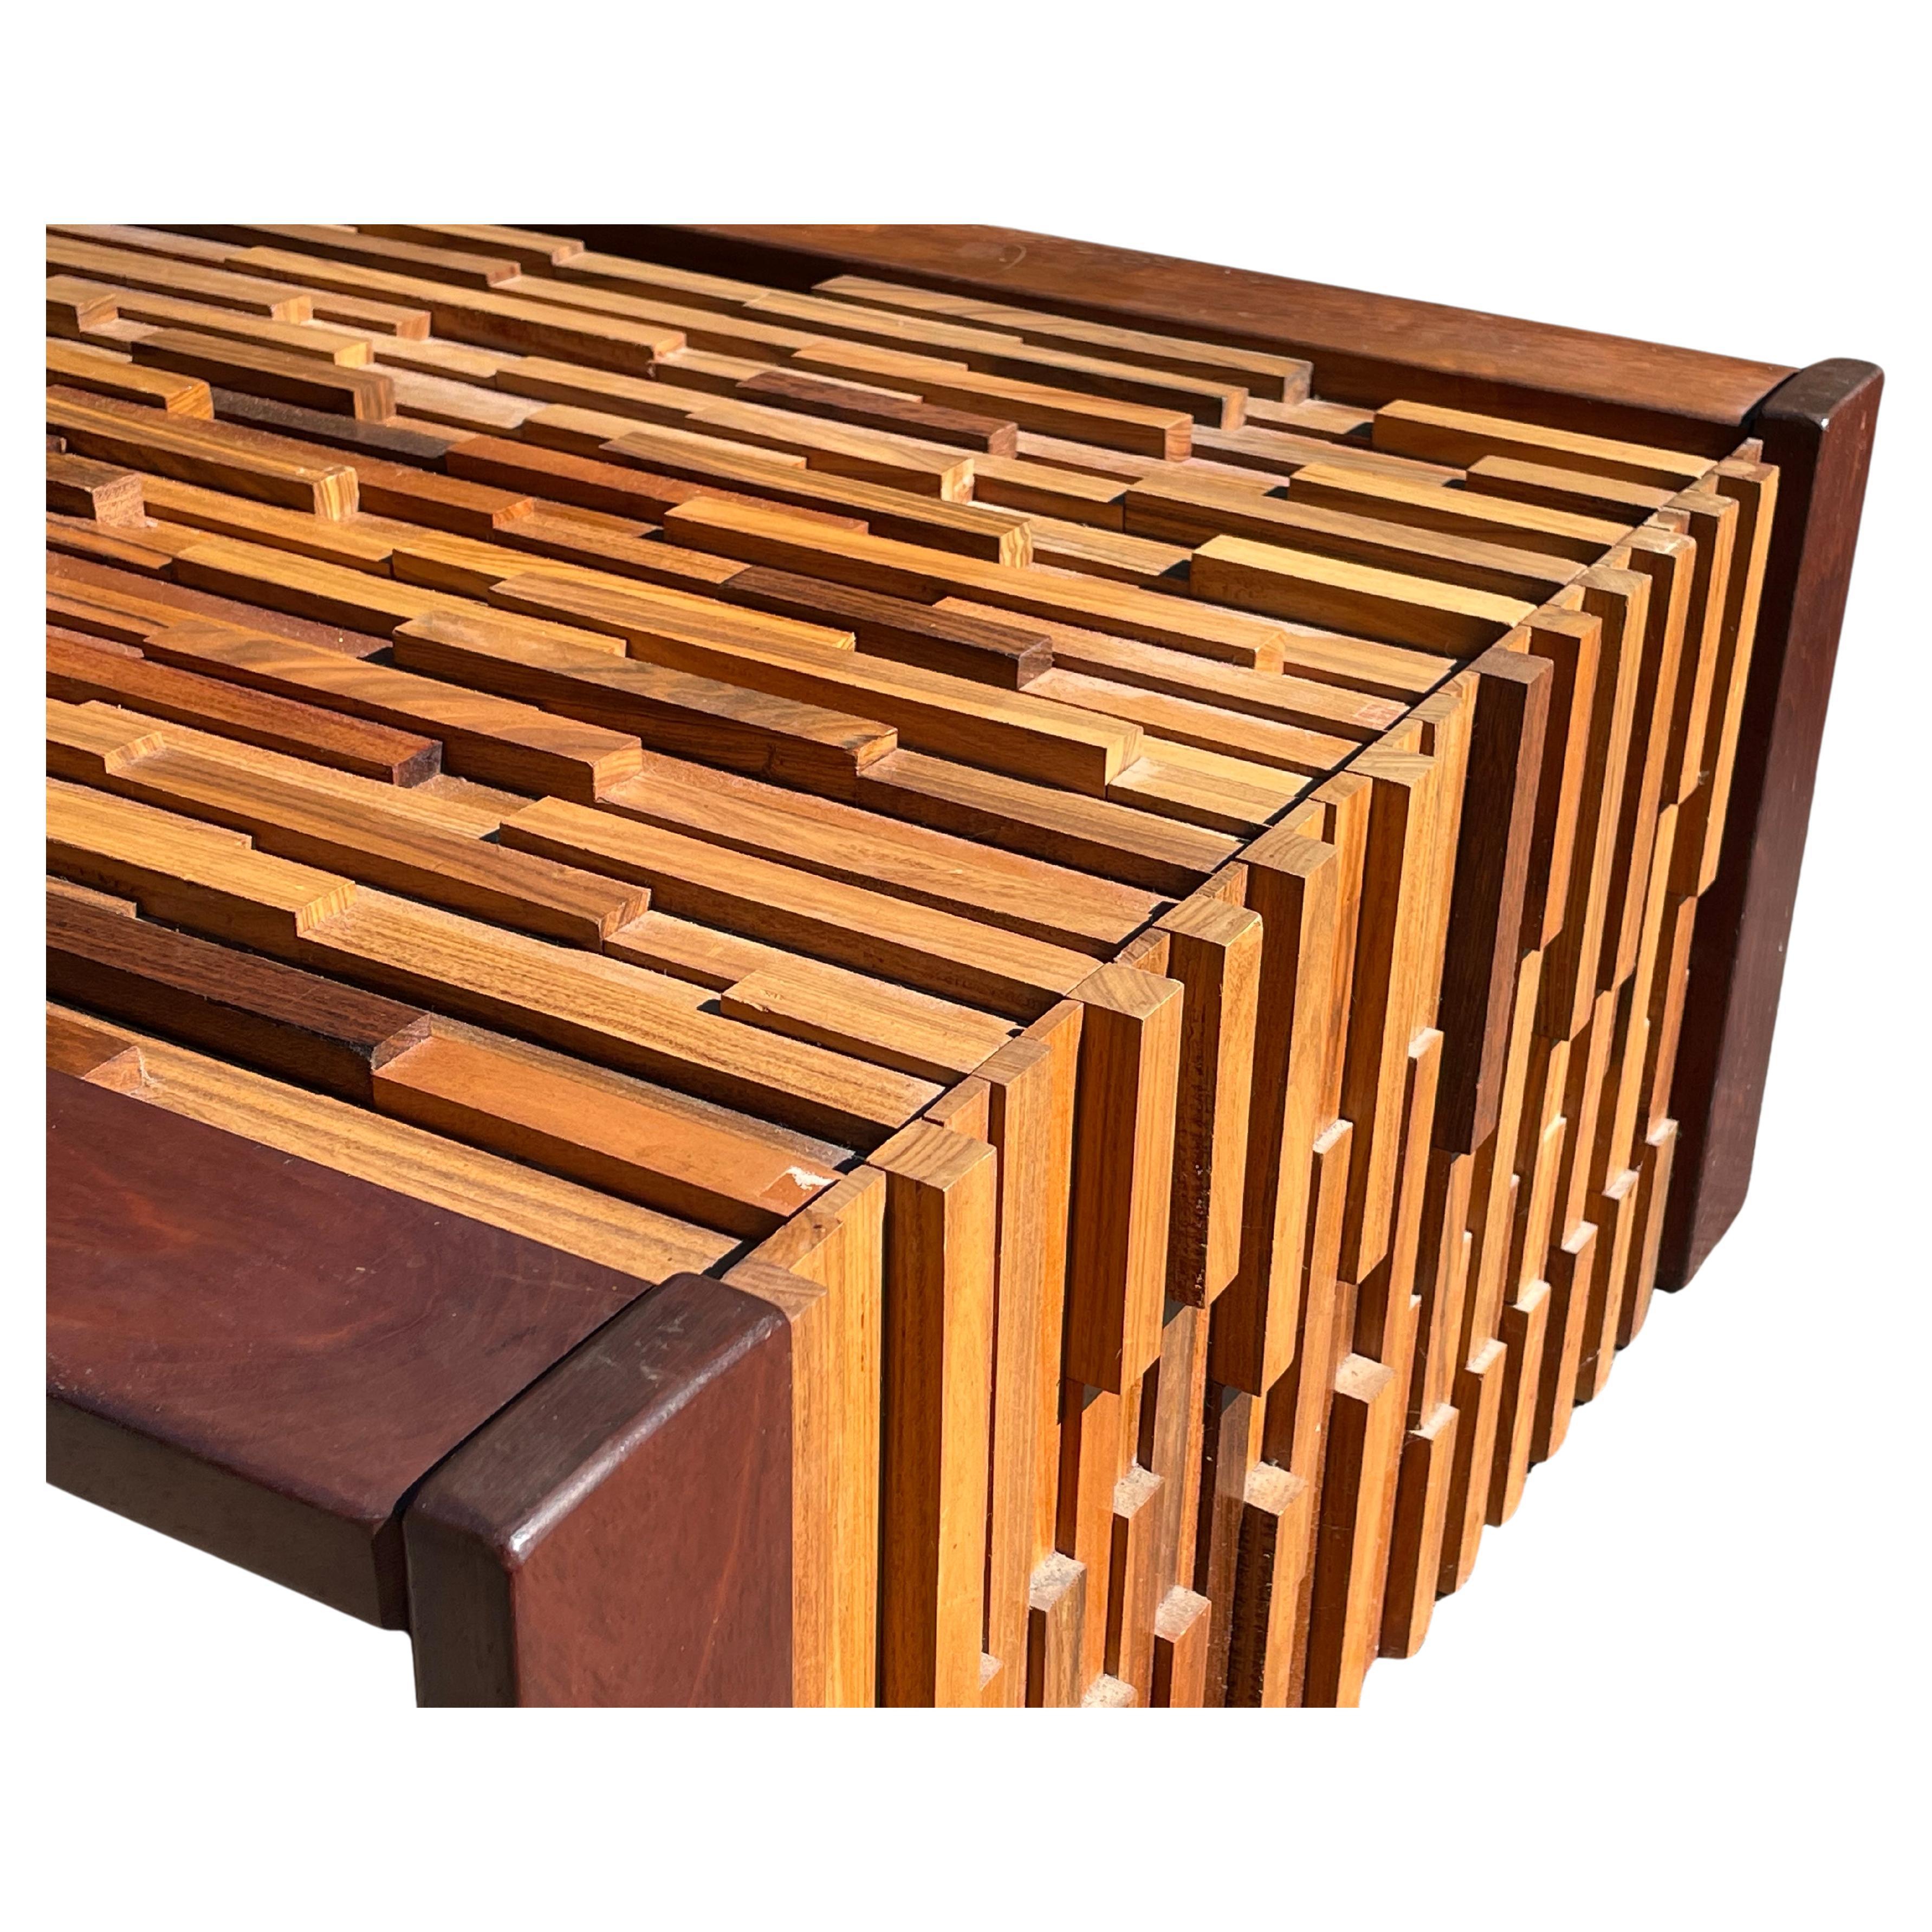 Sculptural cocktail table designed by Percival Lafer, Brazil, 1960s. 

This iconic coffee table is one of Lafer's most famous designs and was made of various tropical hardwood including rosewood, teak and jacaranda in different heights and lengths